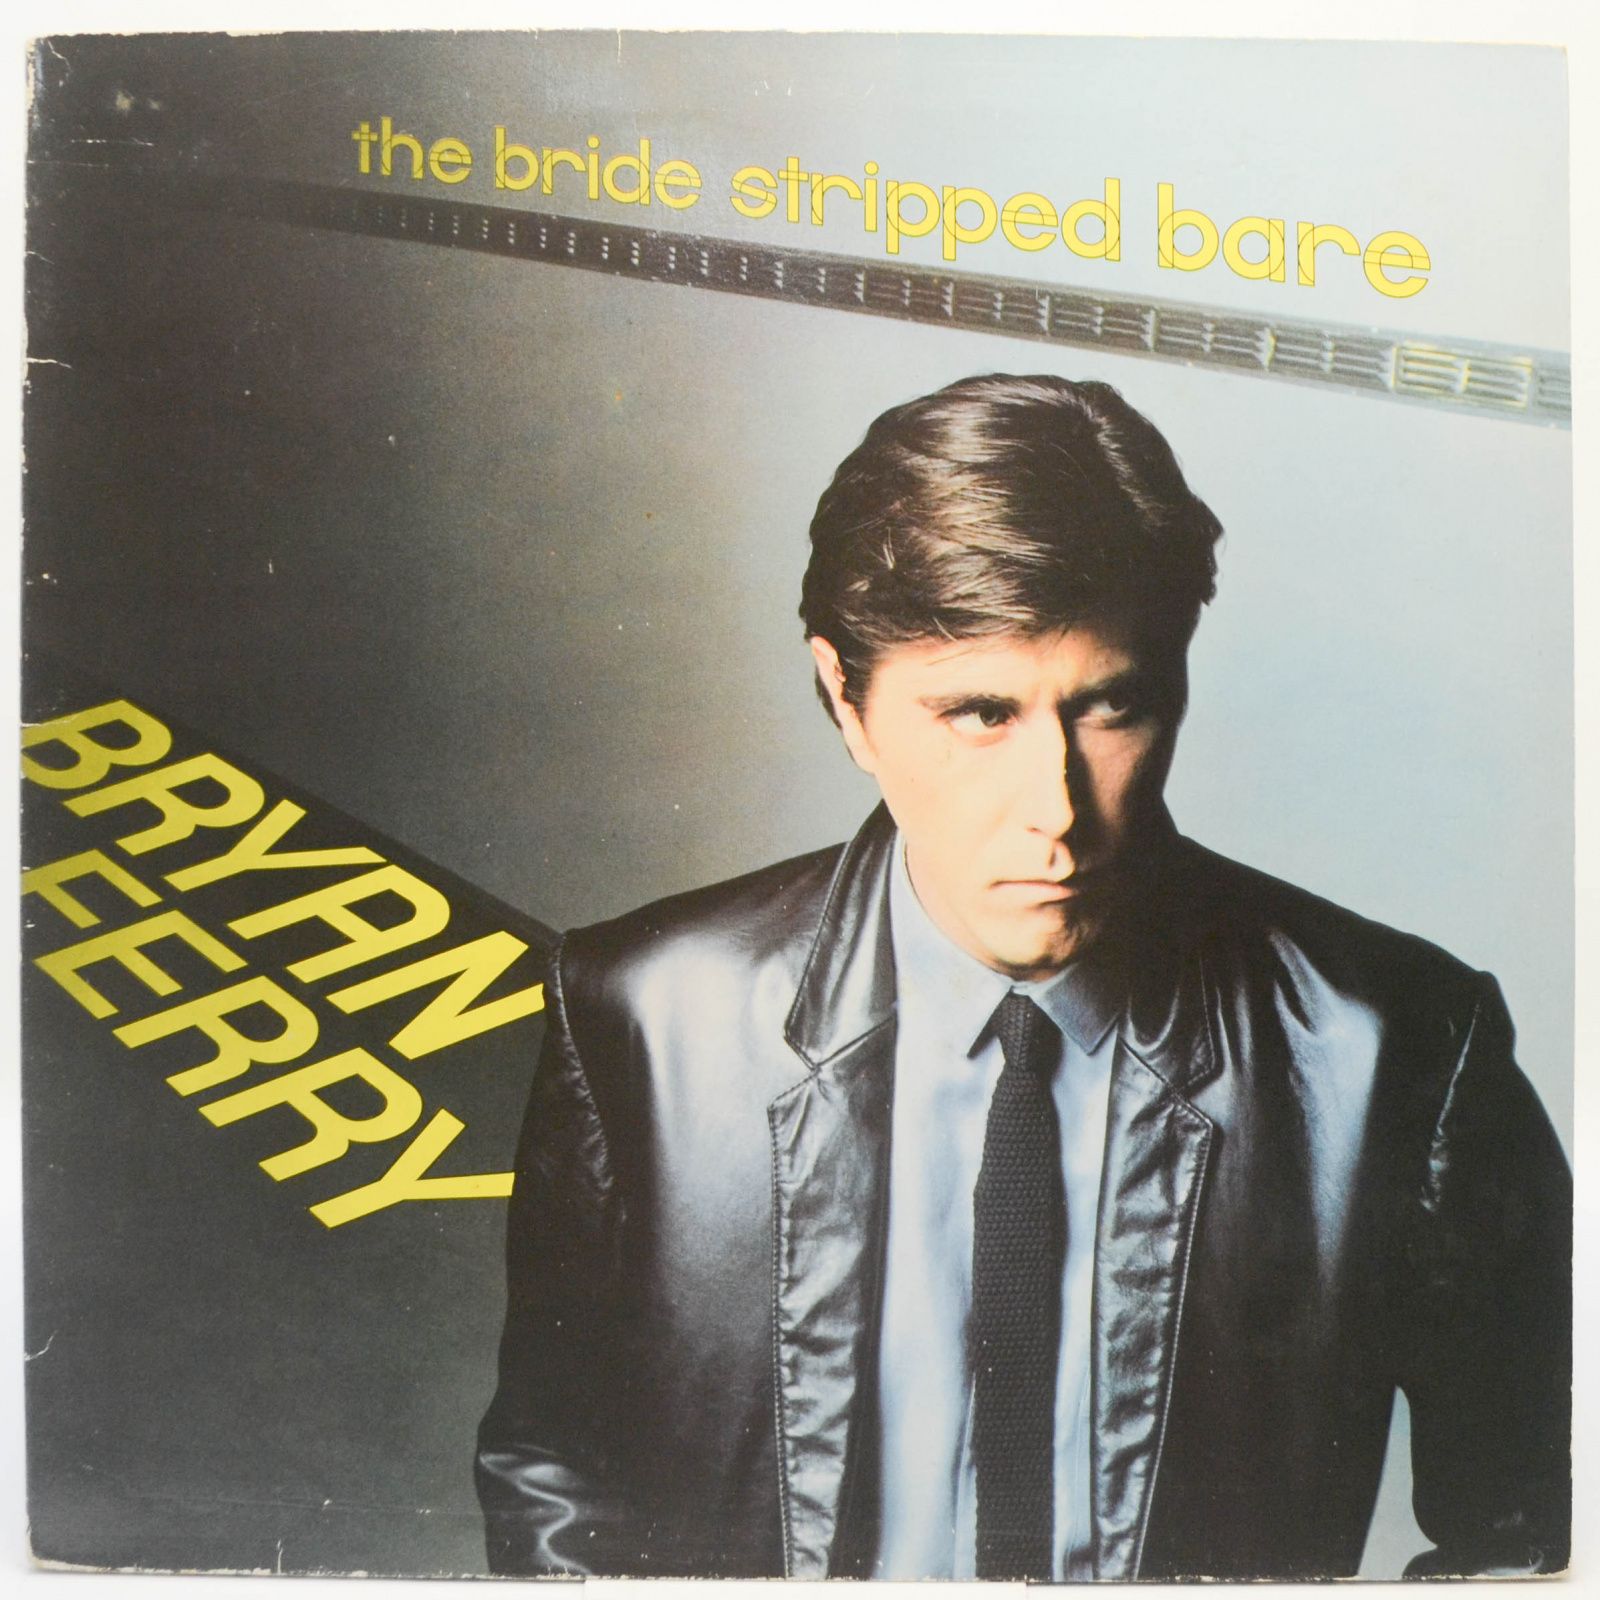 Bryan Ferry — The Bride Stripped Bare, 1978